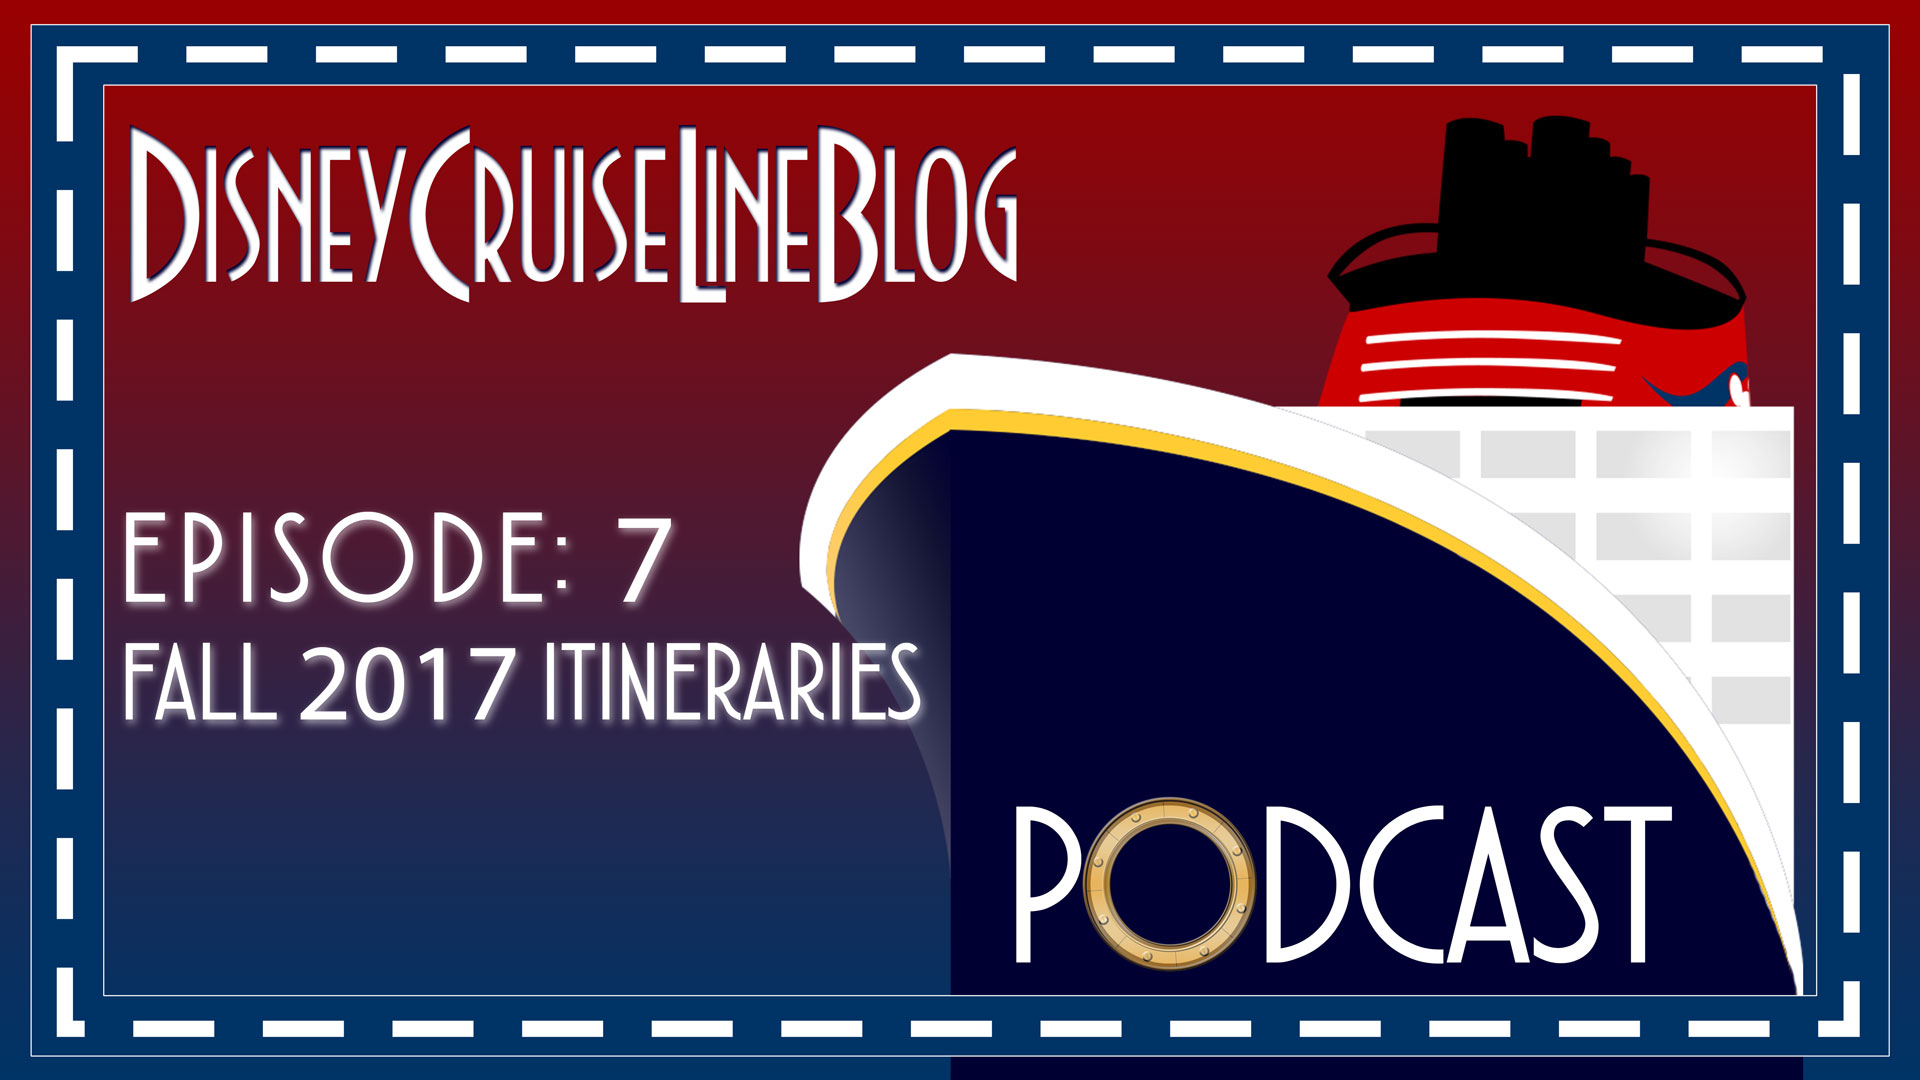 DCL Blog Podcast Episode 7 Fall 2017 Itineraries